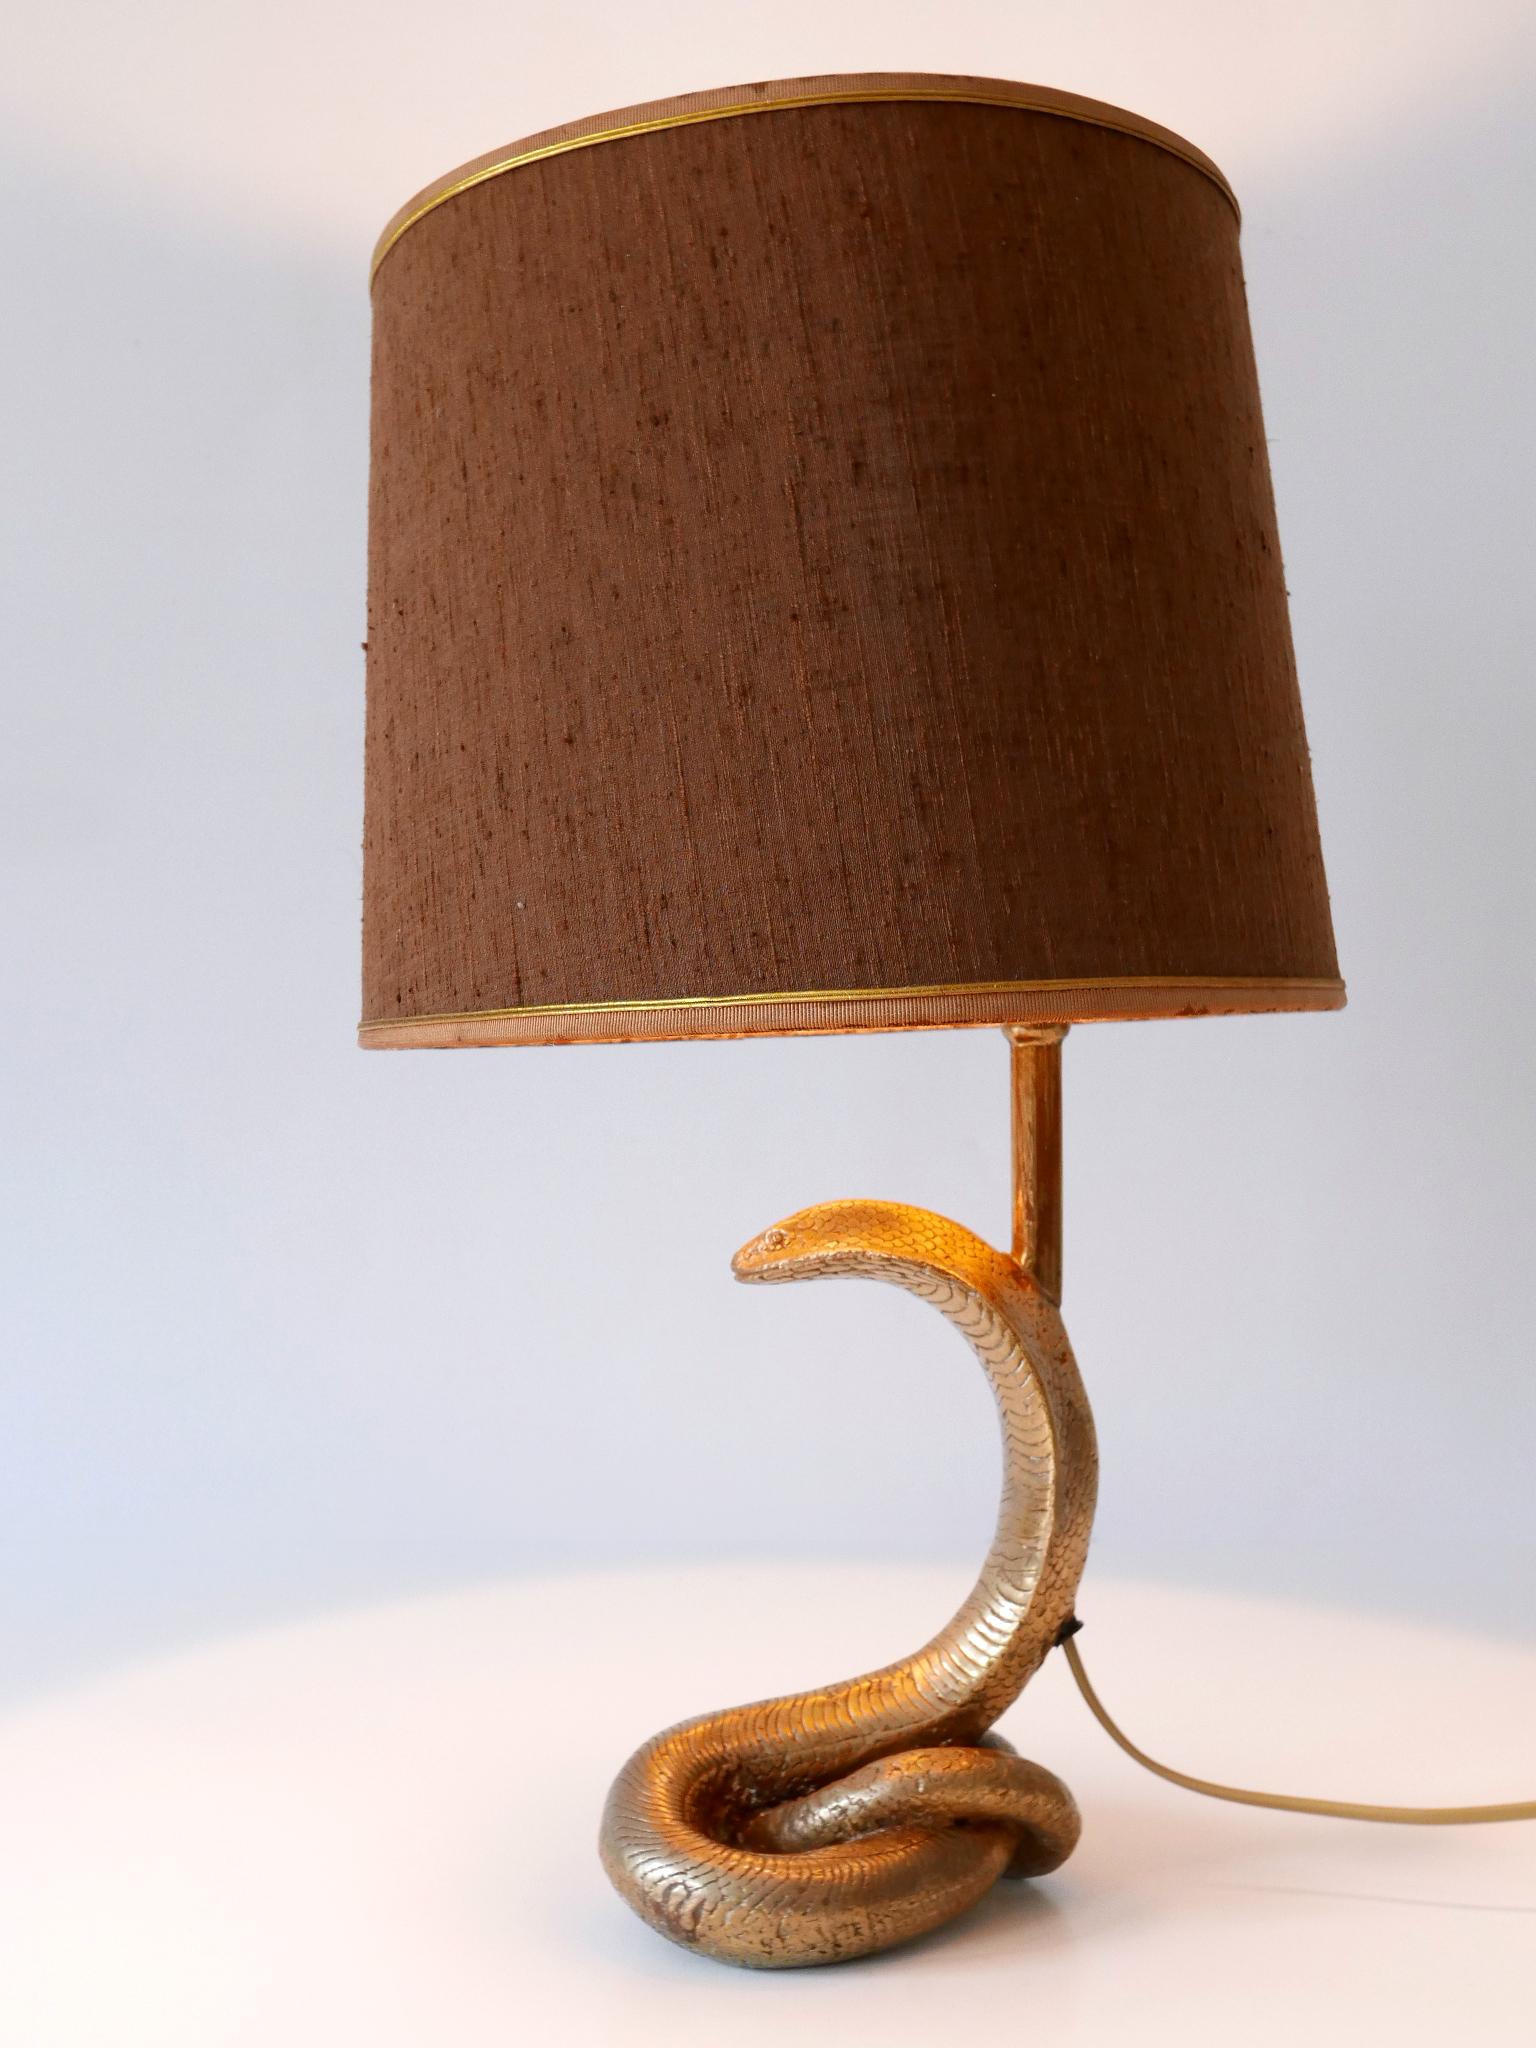 Exceptional Mid-Century Modern Cobra Table Lamp by Maison Jansen France 1970s For Sale 2